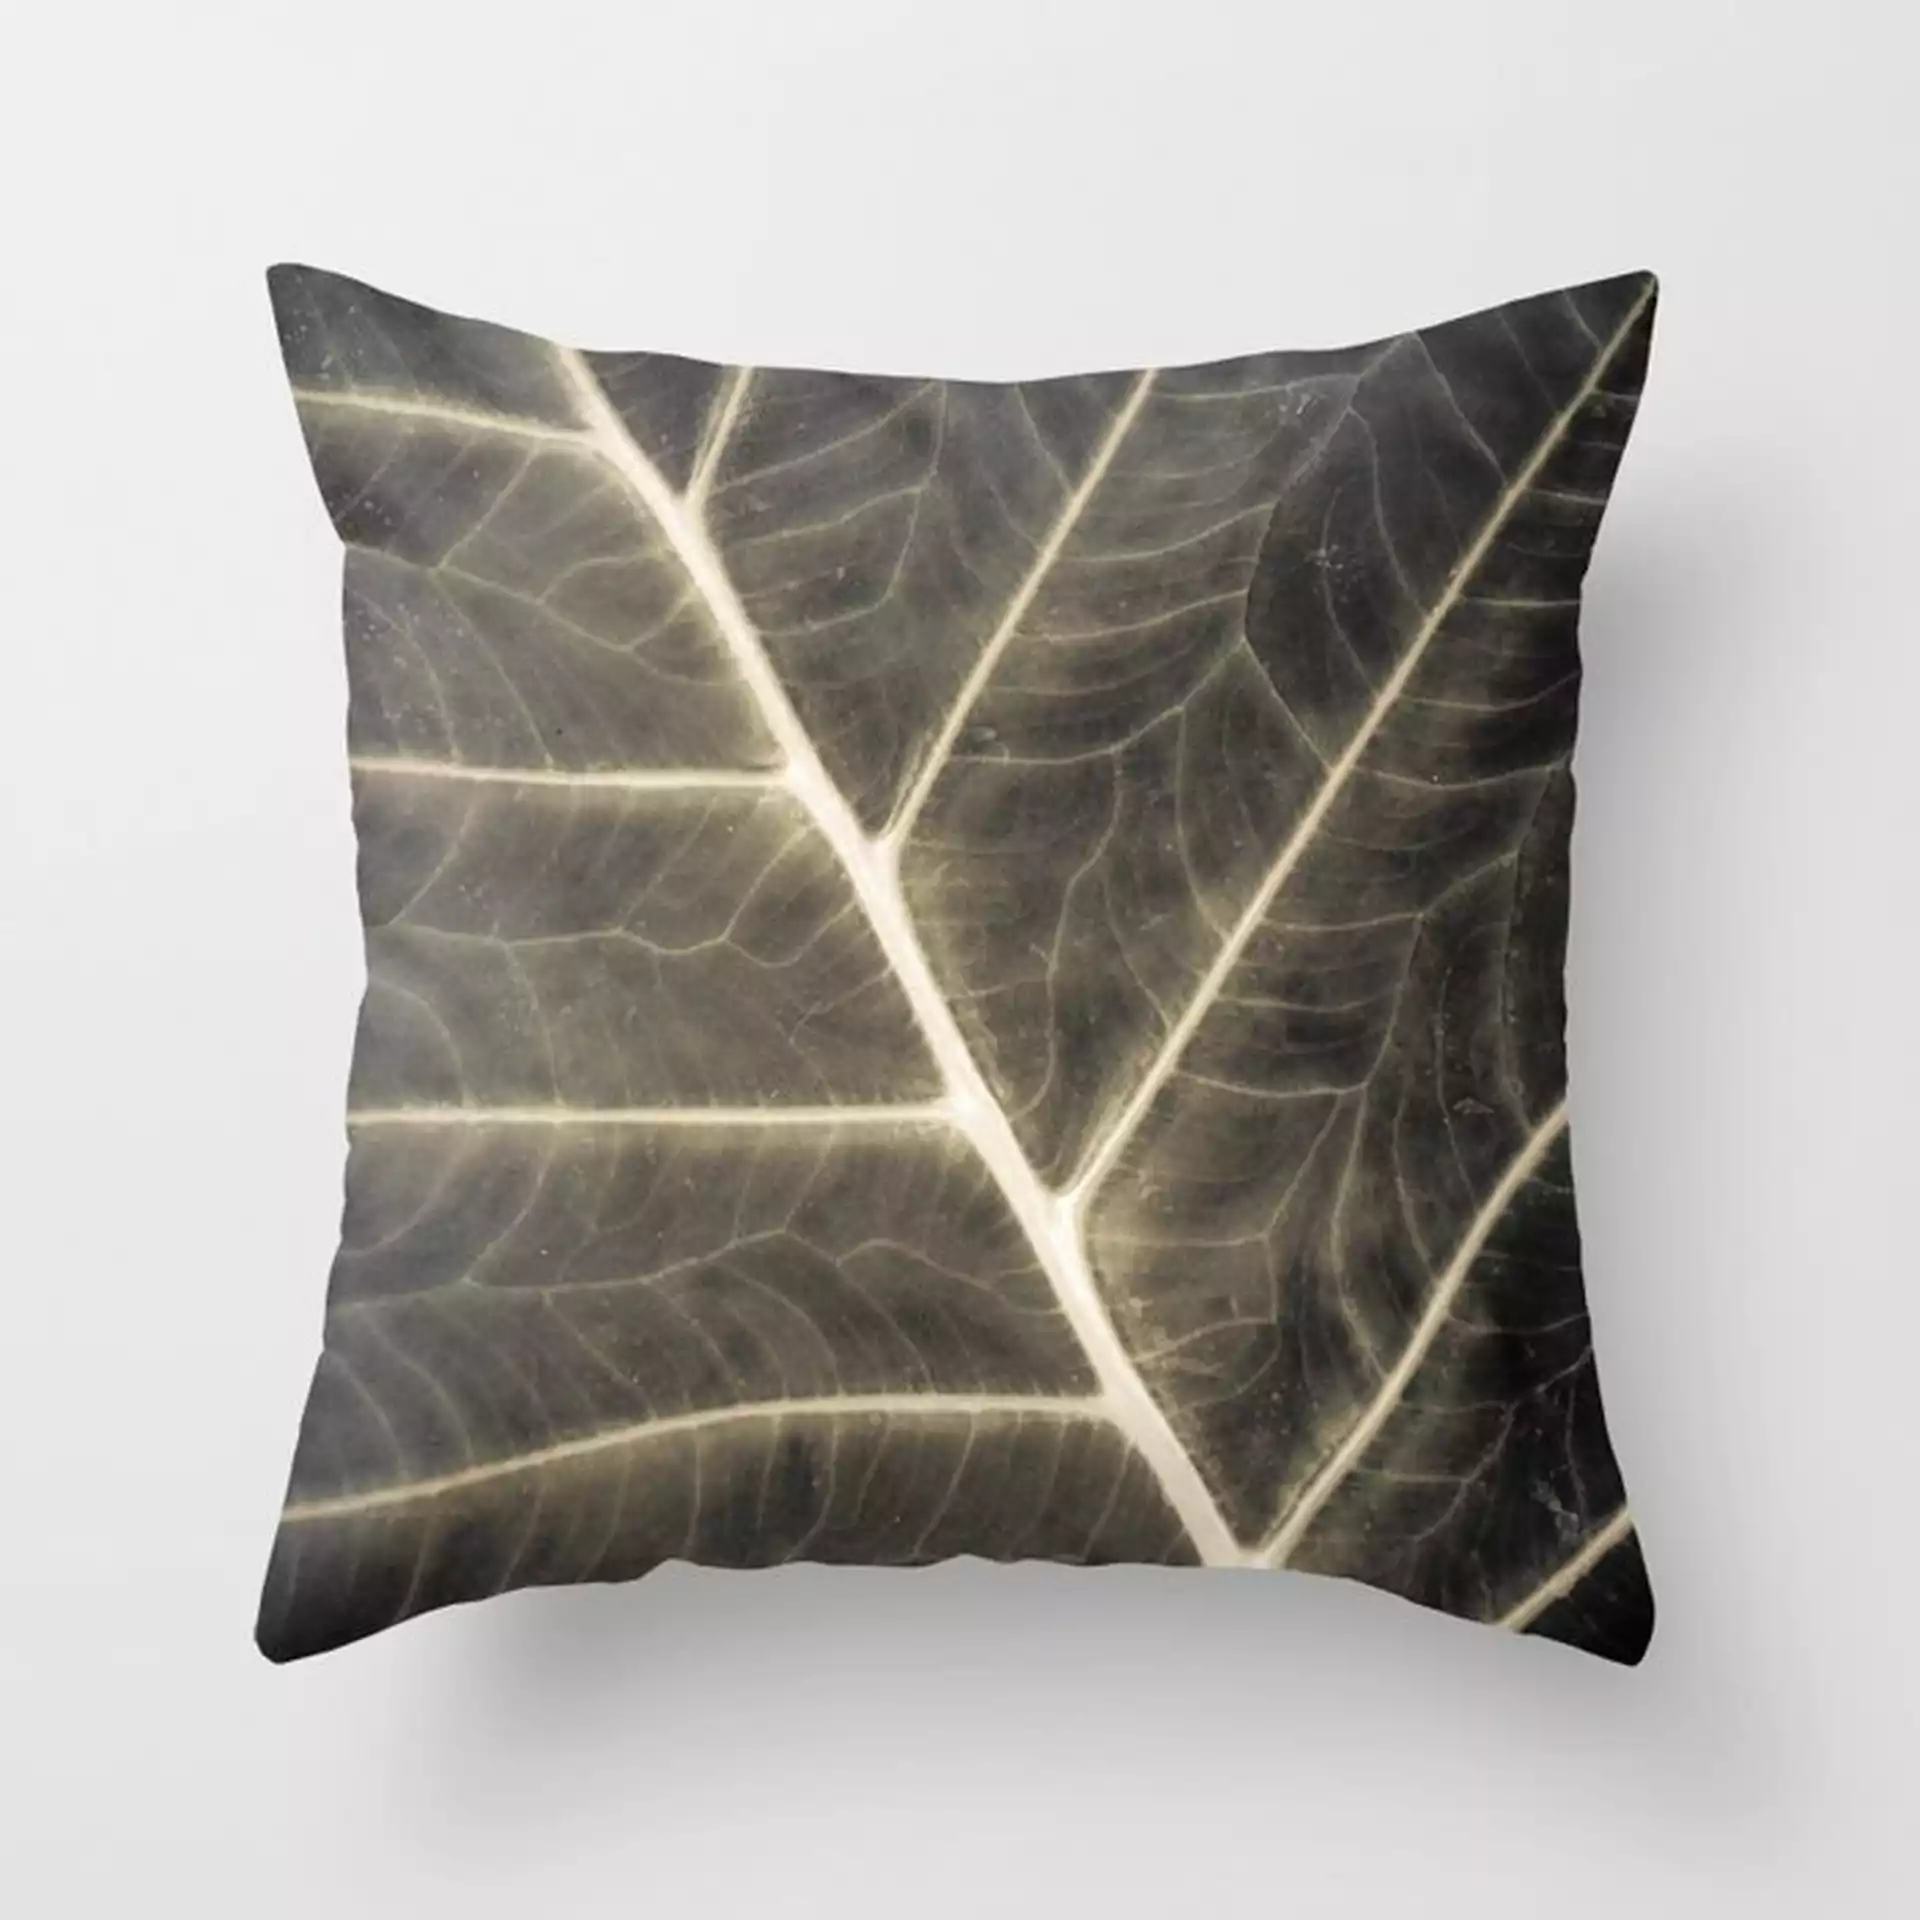 Leaf Patterns Couch Throw Pillow by Olivia Joy St.claire - Cozy Home Decor, - Cover (24" x 24") with pillow insert - Indoor Pillow